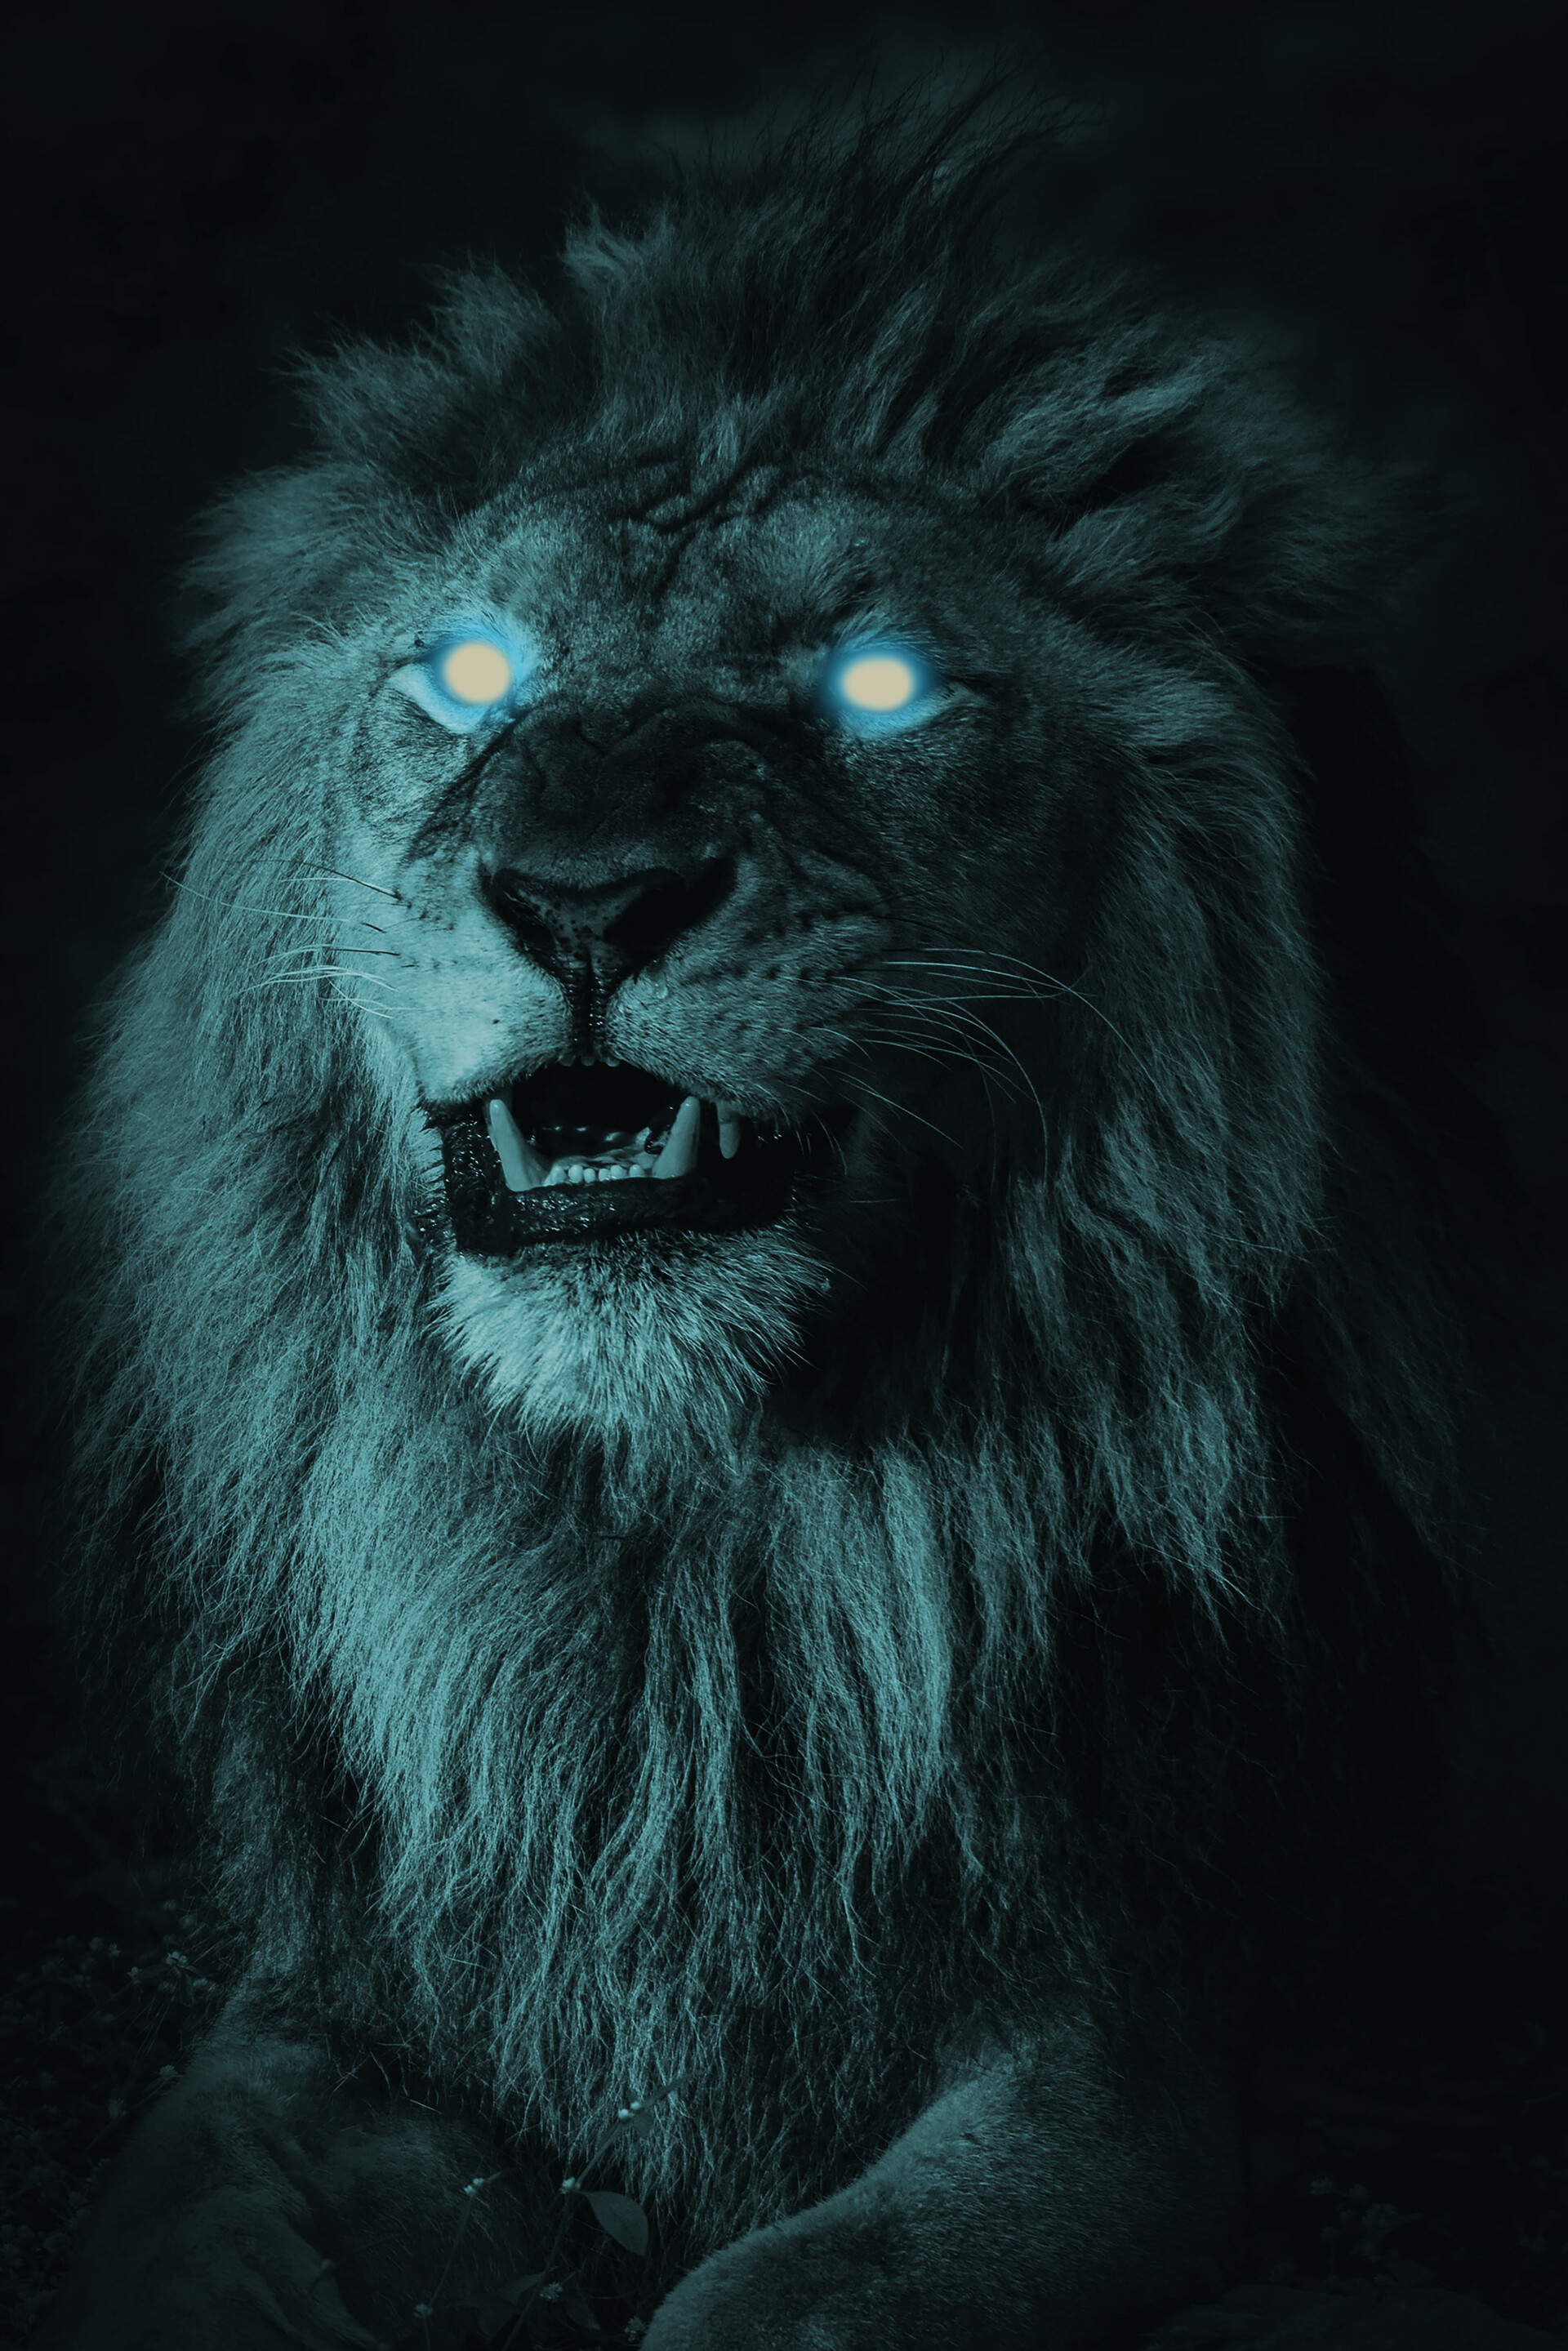 black lion with blue eyes wallpaper